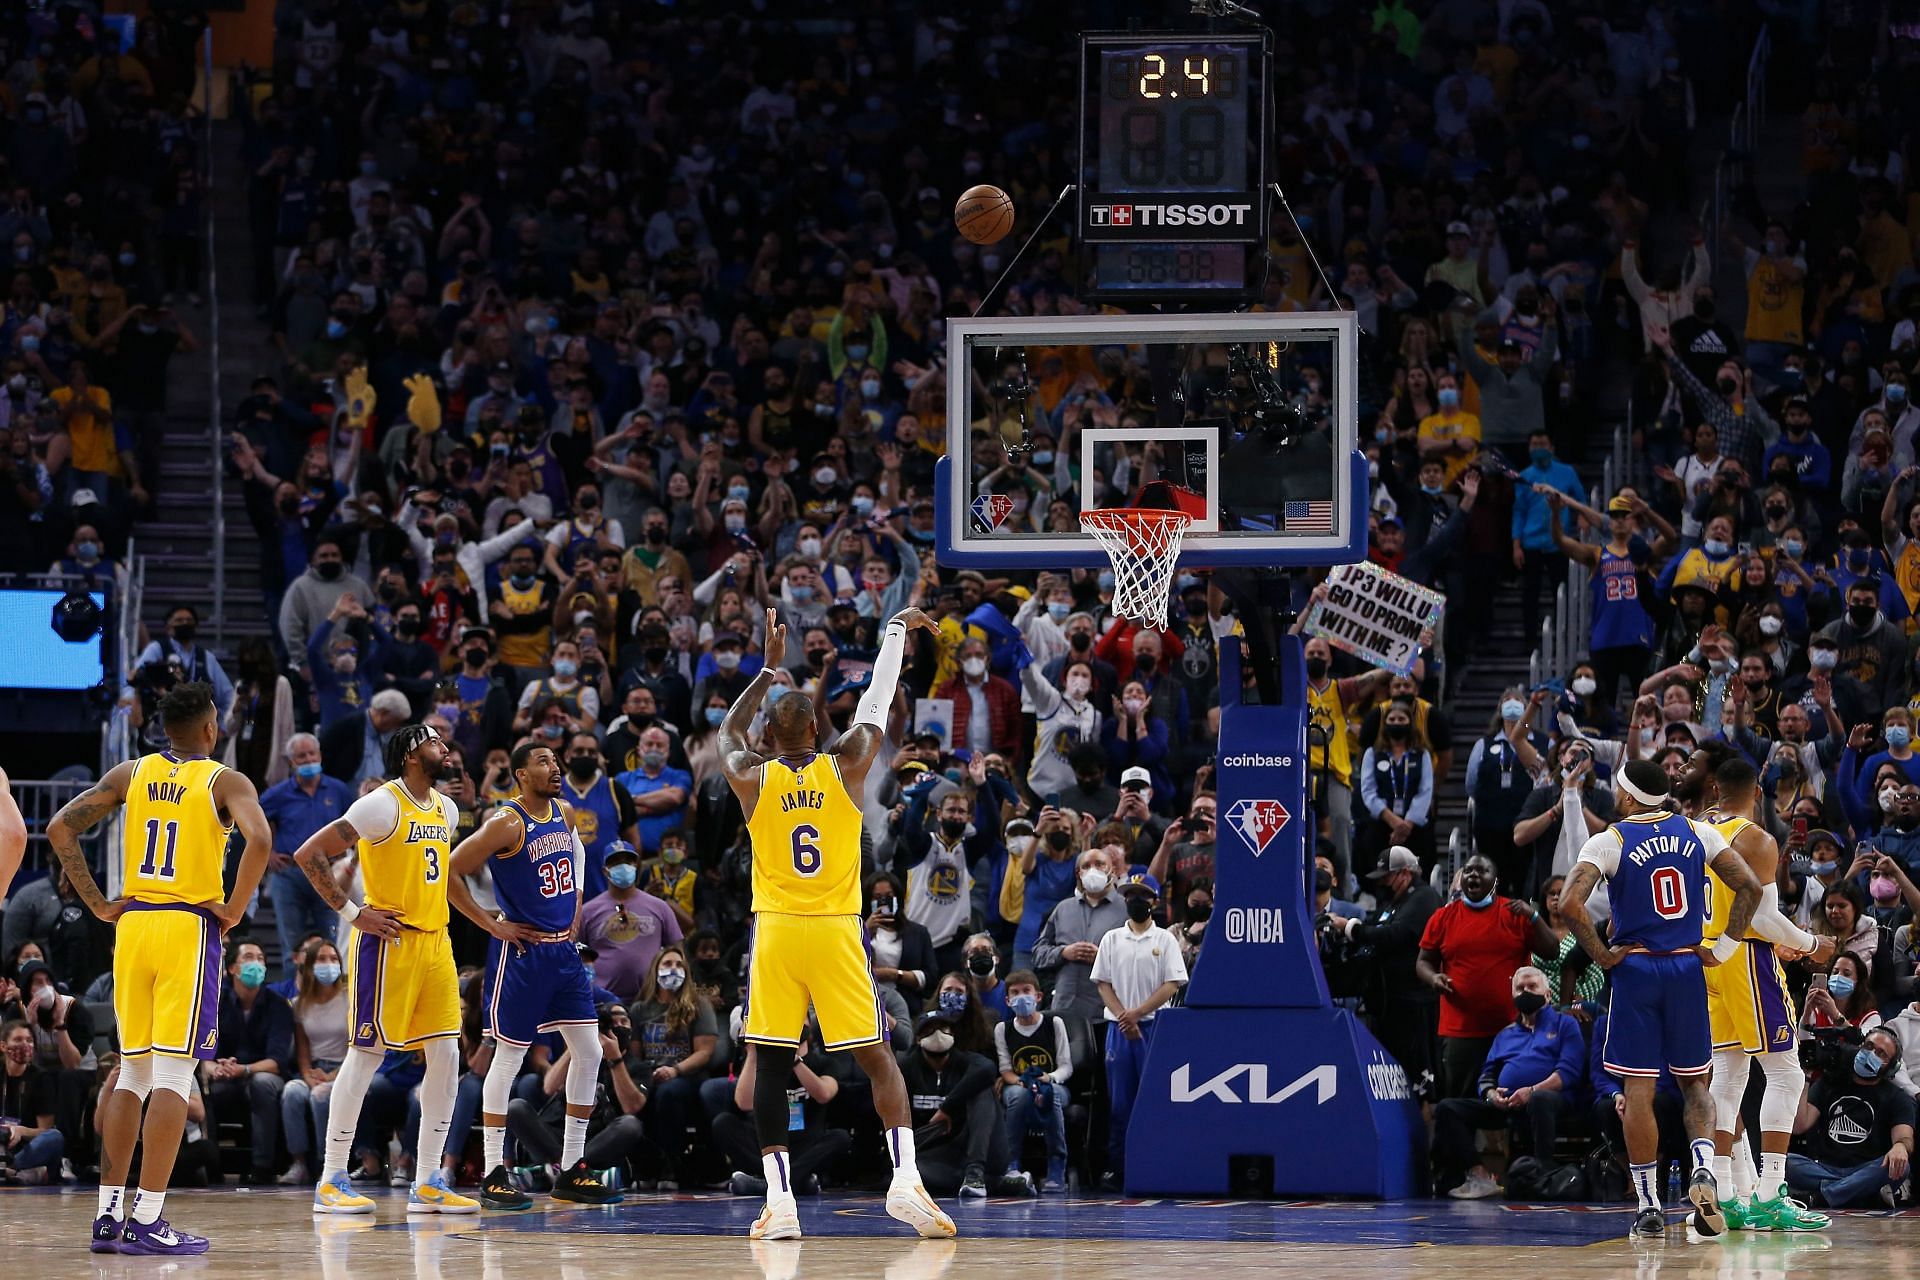 LeBron James attempts free throws in the clutch during Los Angeles Lakers v Golden State Warriors game.